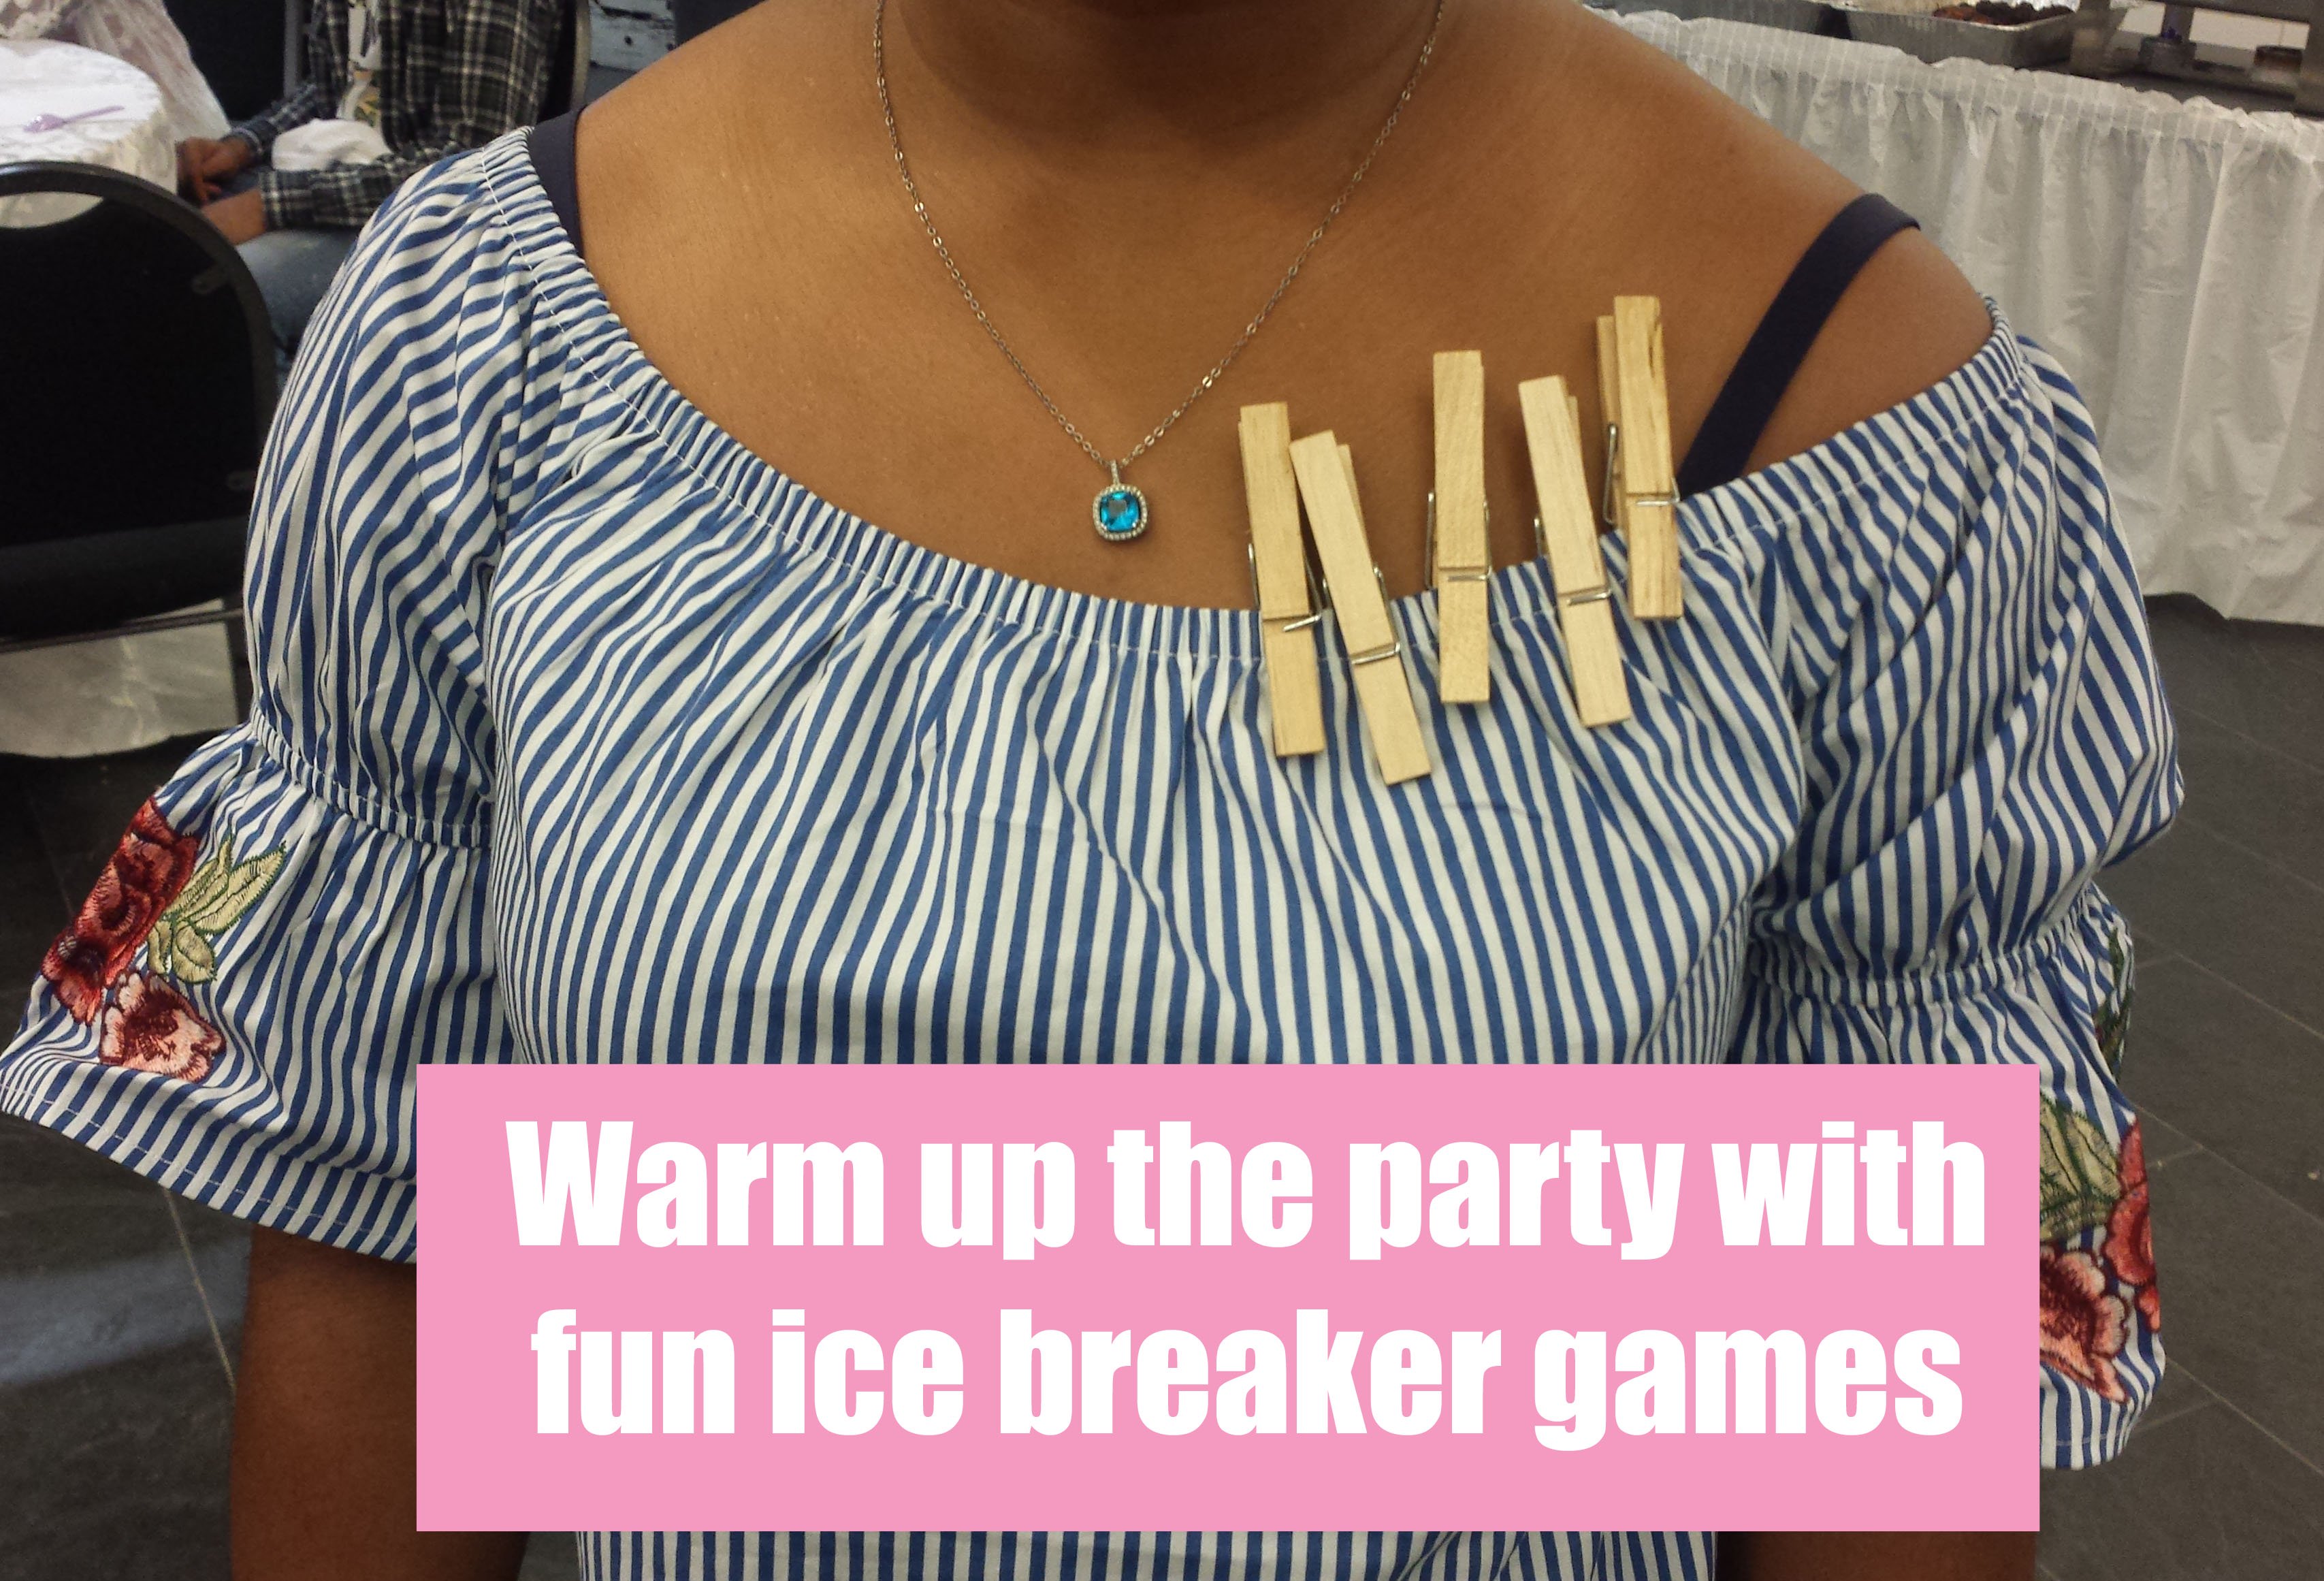 Ice breaker games. A sure bet to get guests to relax, mingle and ready to play. The perfect way to kickstart your baby shower.